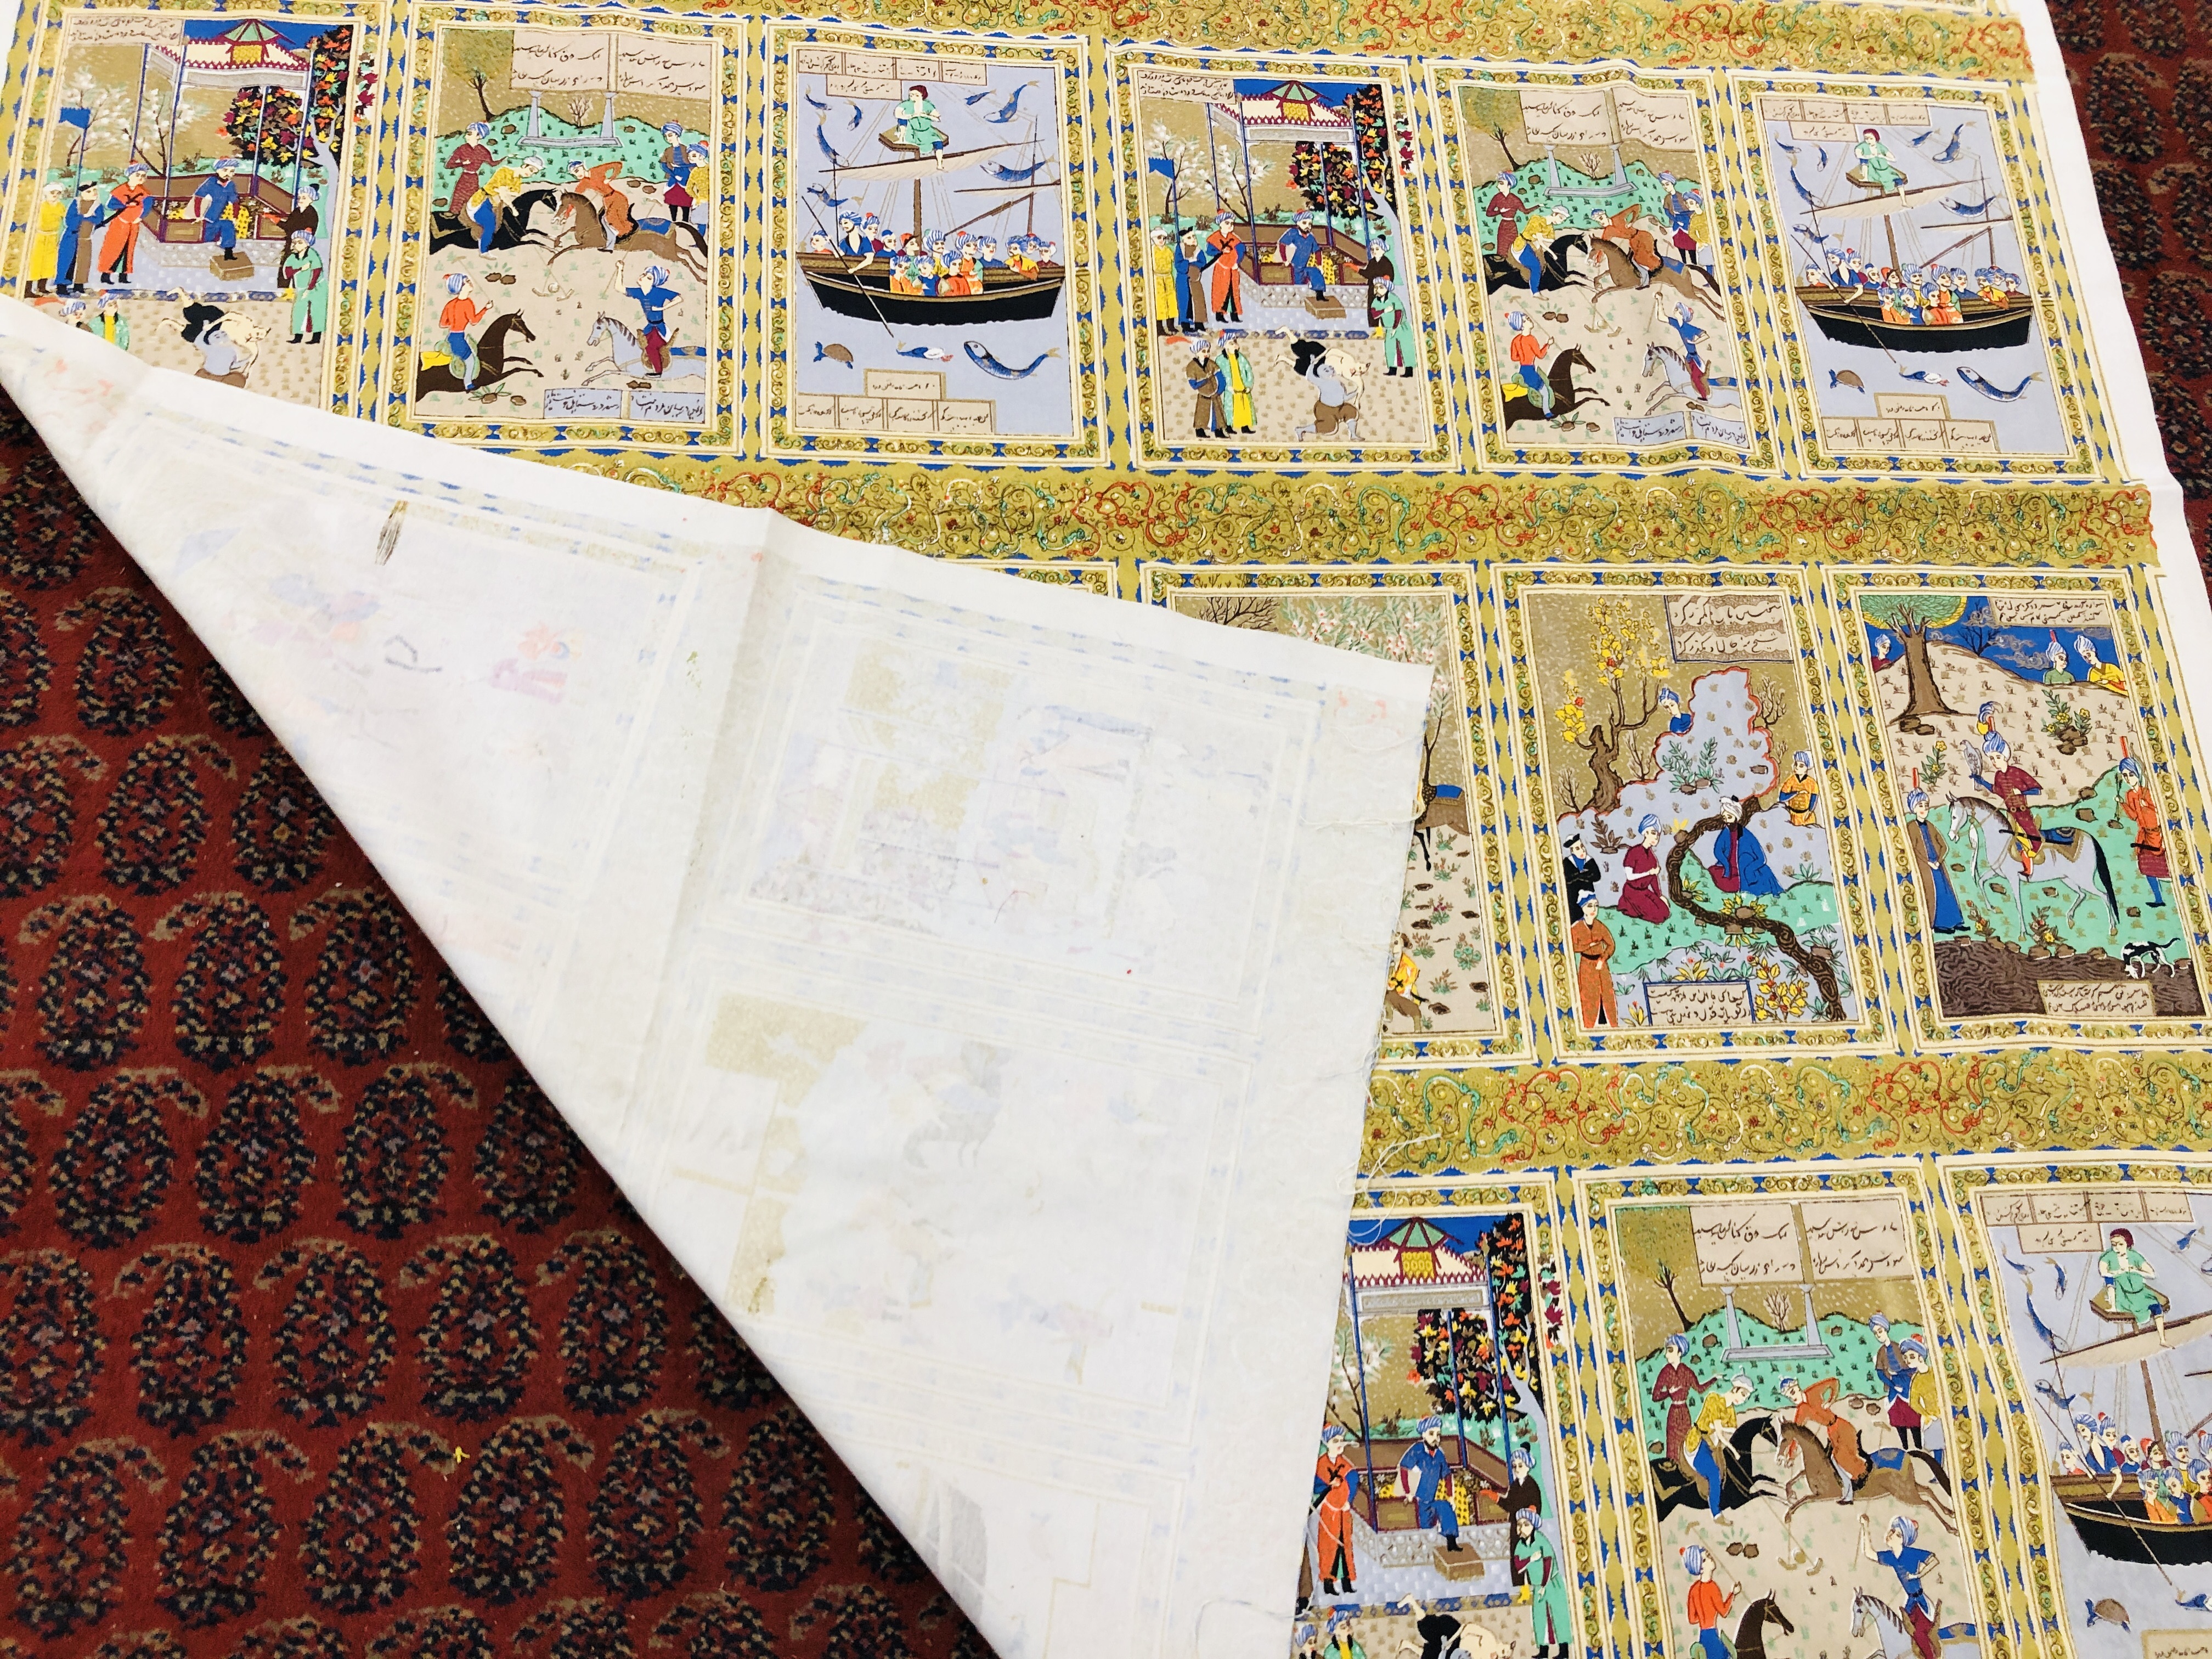 AN INDIAN PRINTED SILK TEXTILE IN THE MUGHAL STYLE WITH 48 SMALL PANELS DEPICTING VARIOUS EVERYDAY - Image 7 of 7